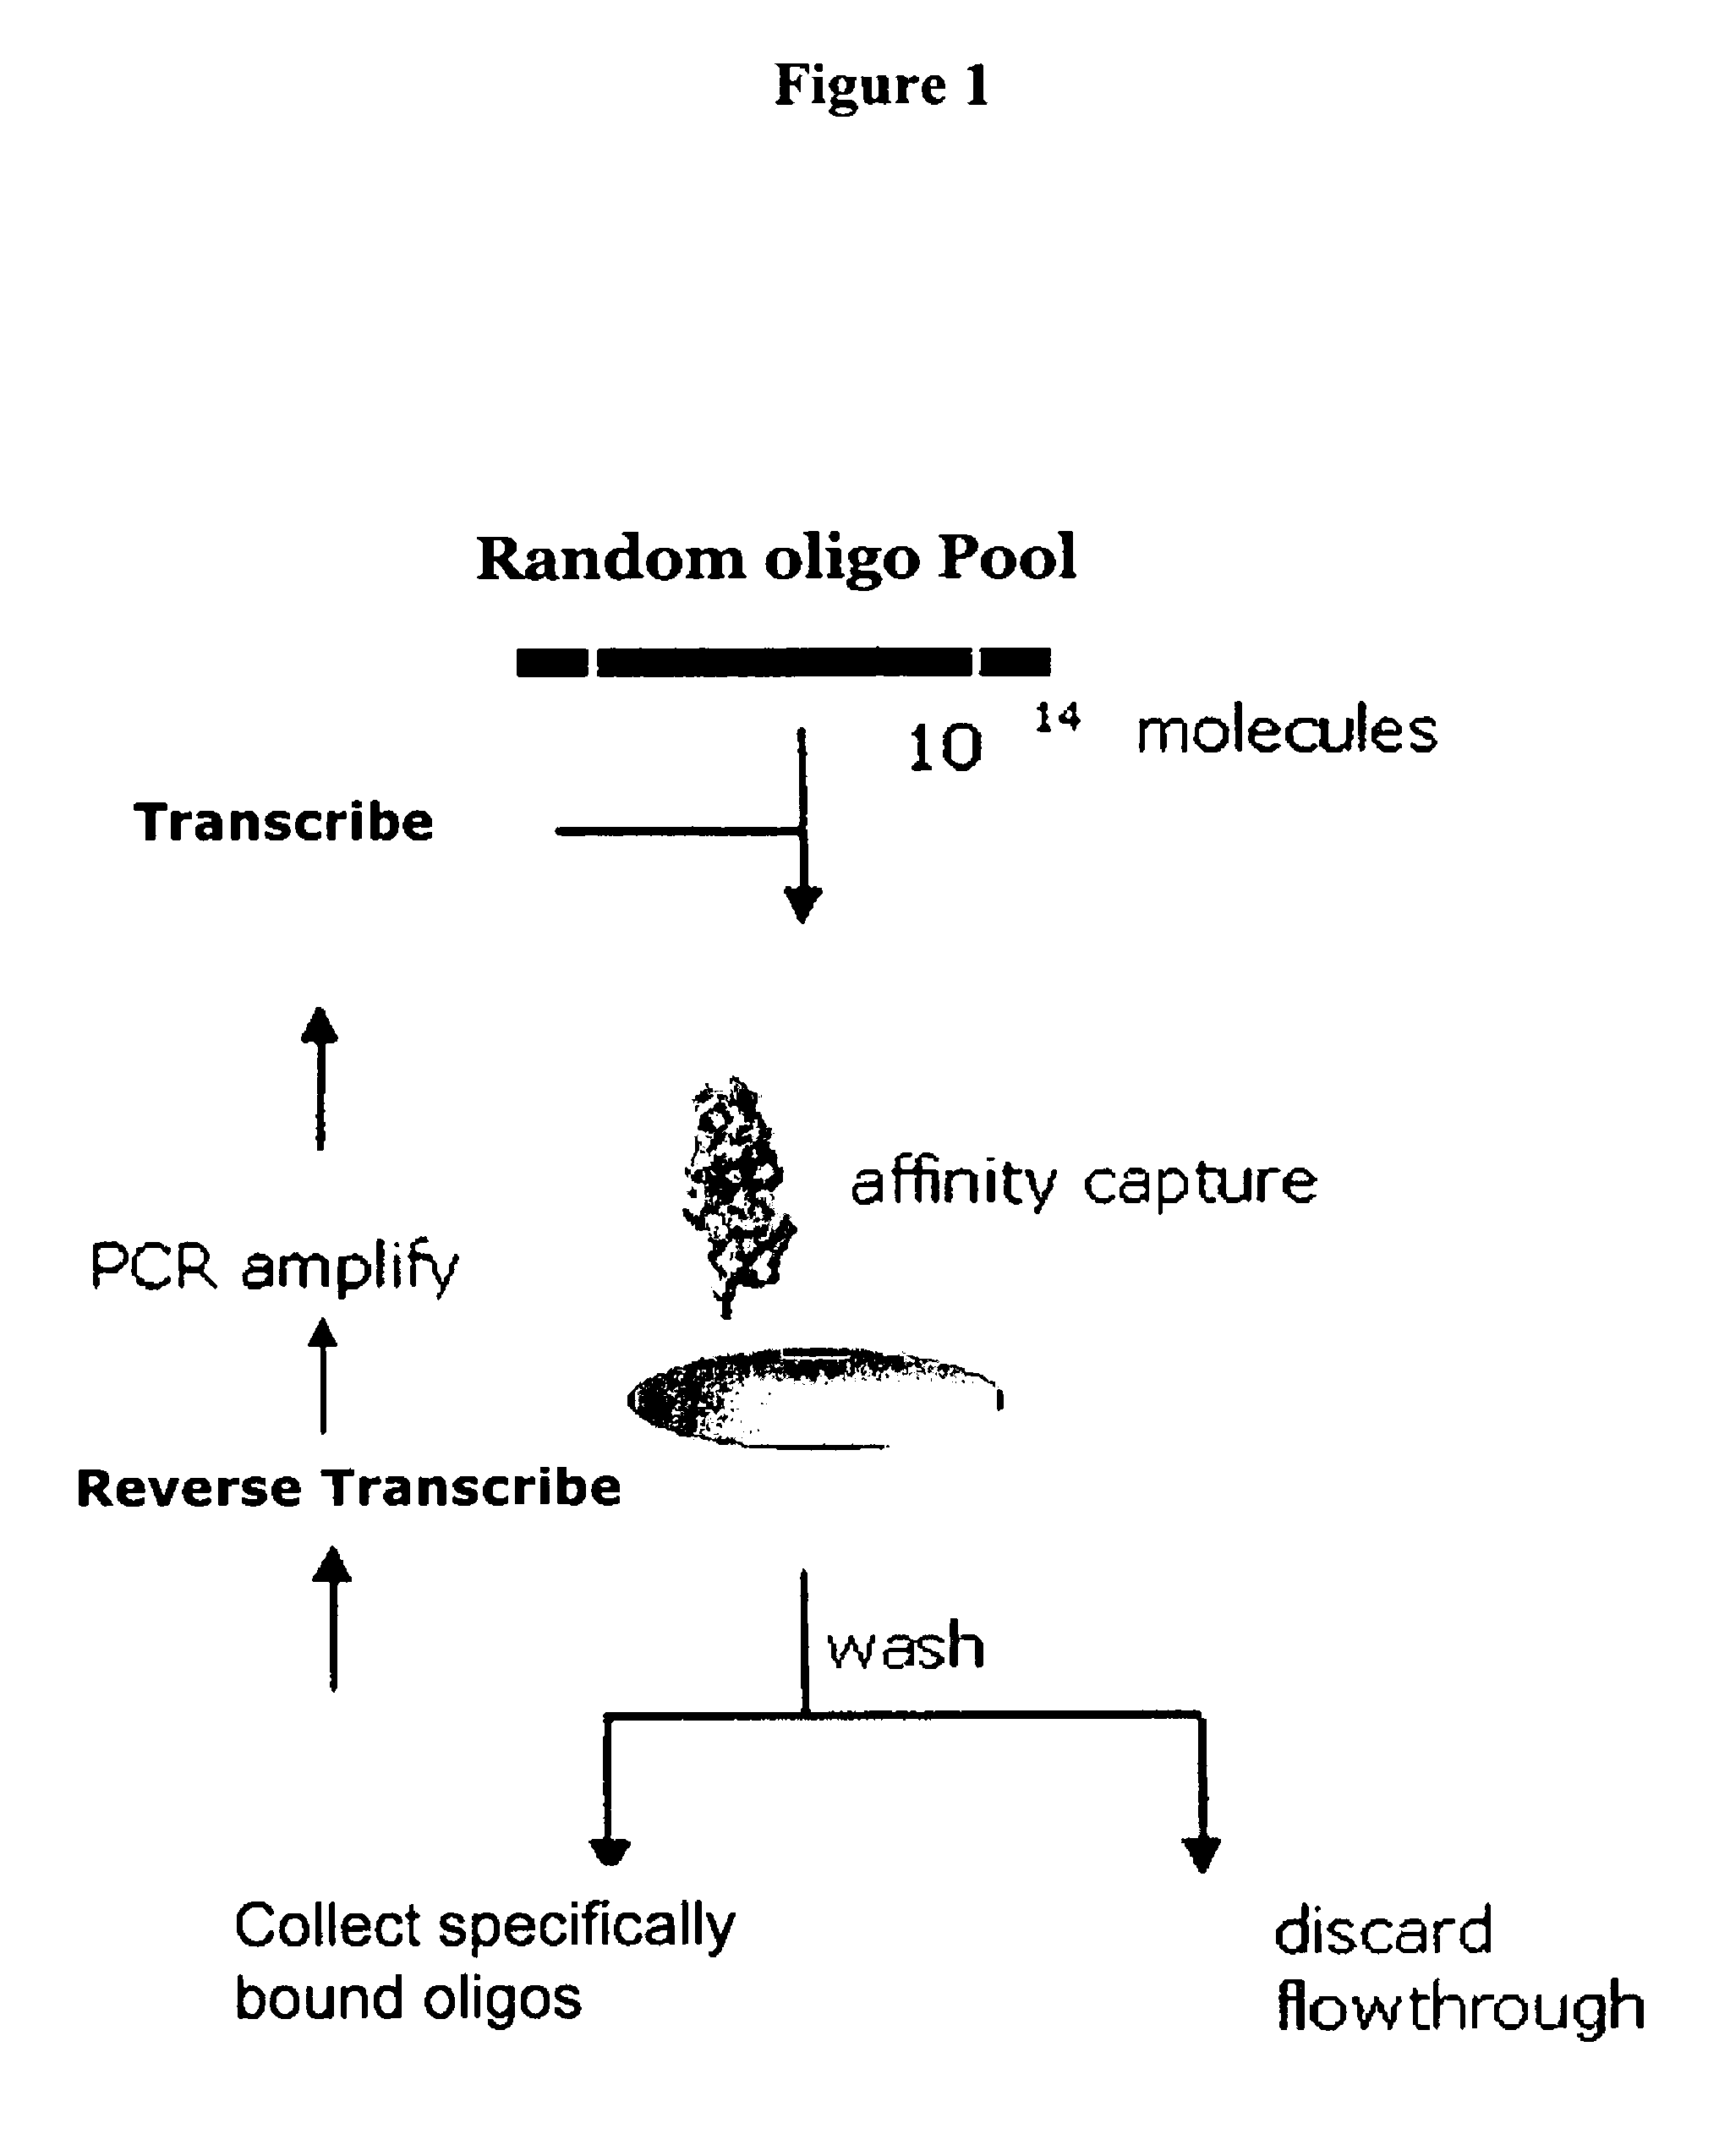 Materials and methods for the generation of fully 2′-modified nucleic acid transcripts